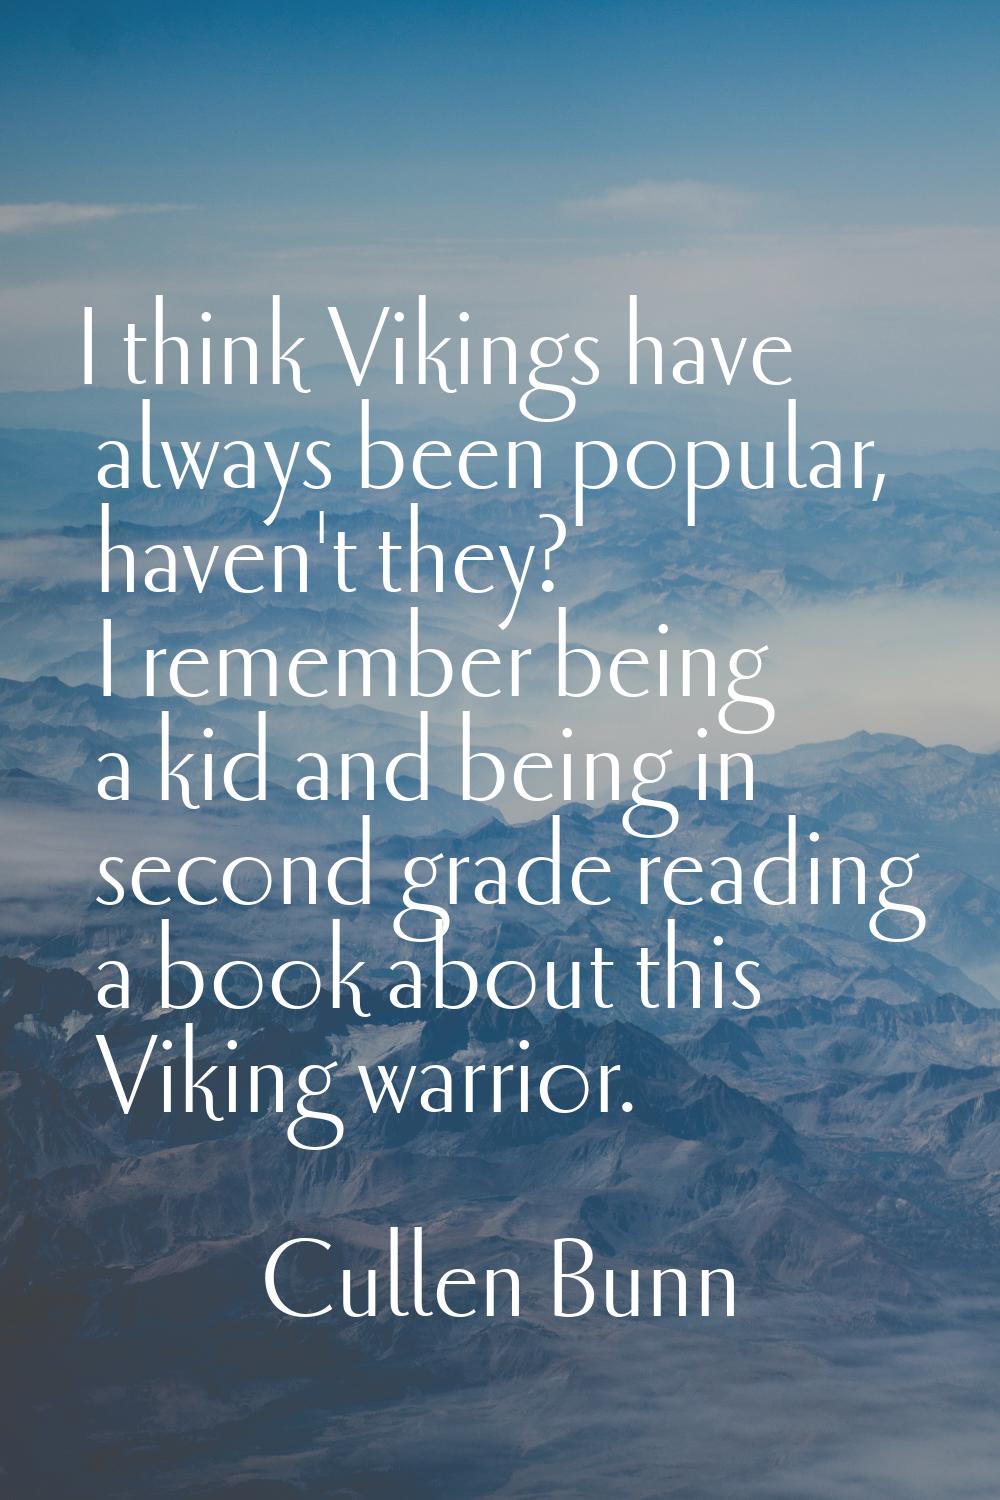 I think Vikings have always been popular, haven't they? I remember being a kid and being in second 